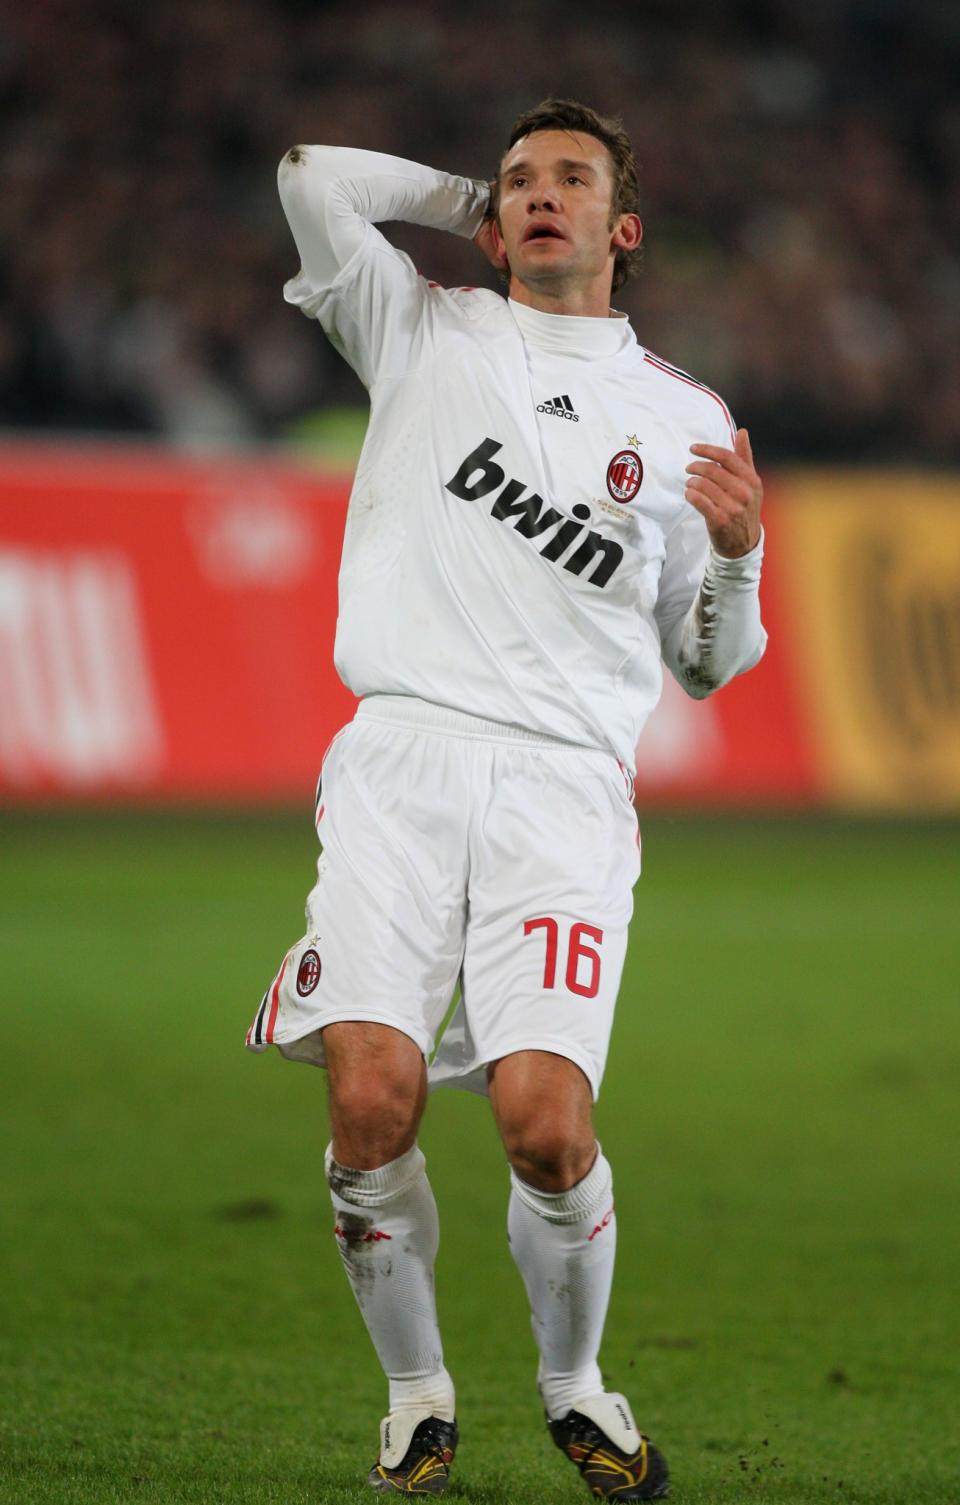 <p>Ah, yes, Shevchenko. Having scored 173 goals in seven years with AC Milan before his ill-fated spell with Chelsea, you’d have thought the Italians would give him his favoured number seven shirt back when he returned on loan in 2008. He was shafted with the number 76 – the year of his birth. </p>